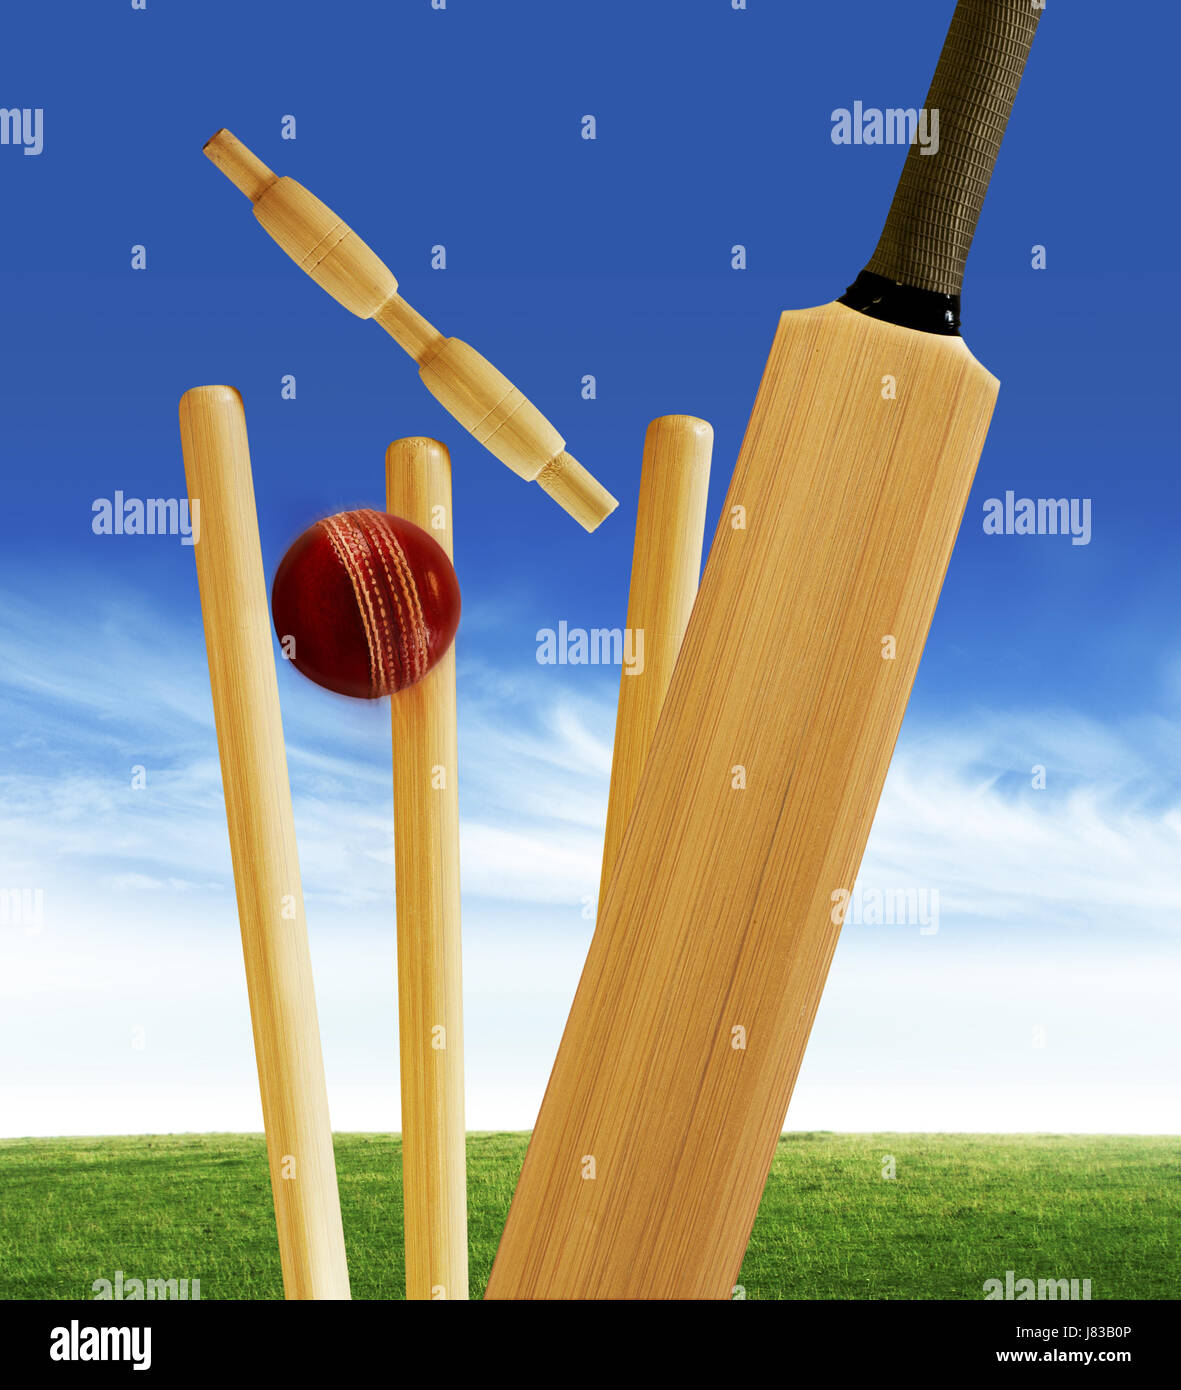 ball bat match red cricket objects detail spare time free time leisure leisure Stock Photo